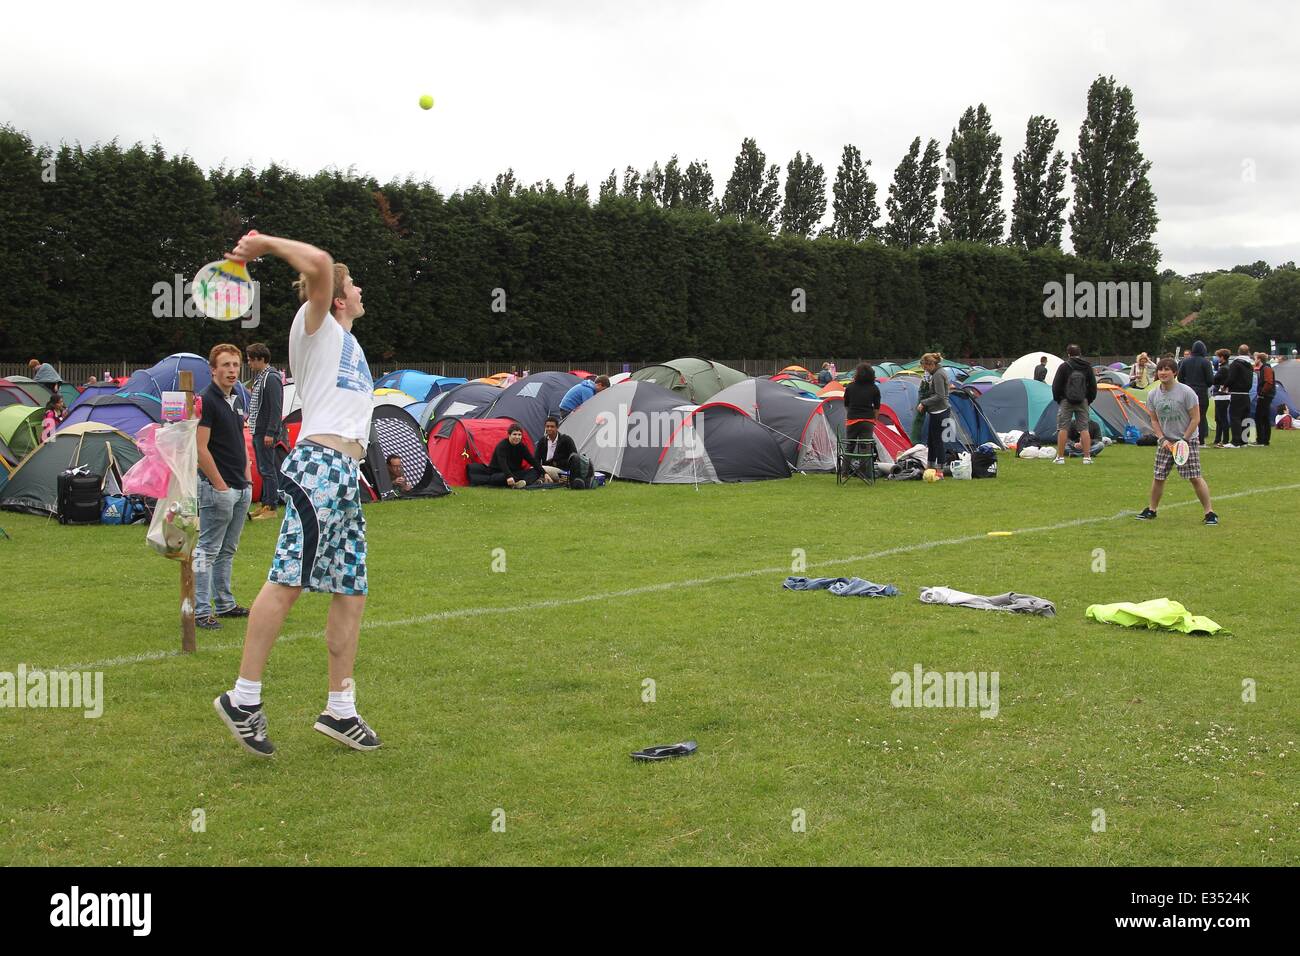 Tennis fans camp out at Wimbledon ahead of the opening day of the 2013 All England Lawn Tennis Championships. Some campers pass the time by playing their own form of tennis on the playing fields opposite.  Where: London, United Kingdom When: 23 Jun 2013 Stock Photo